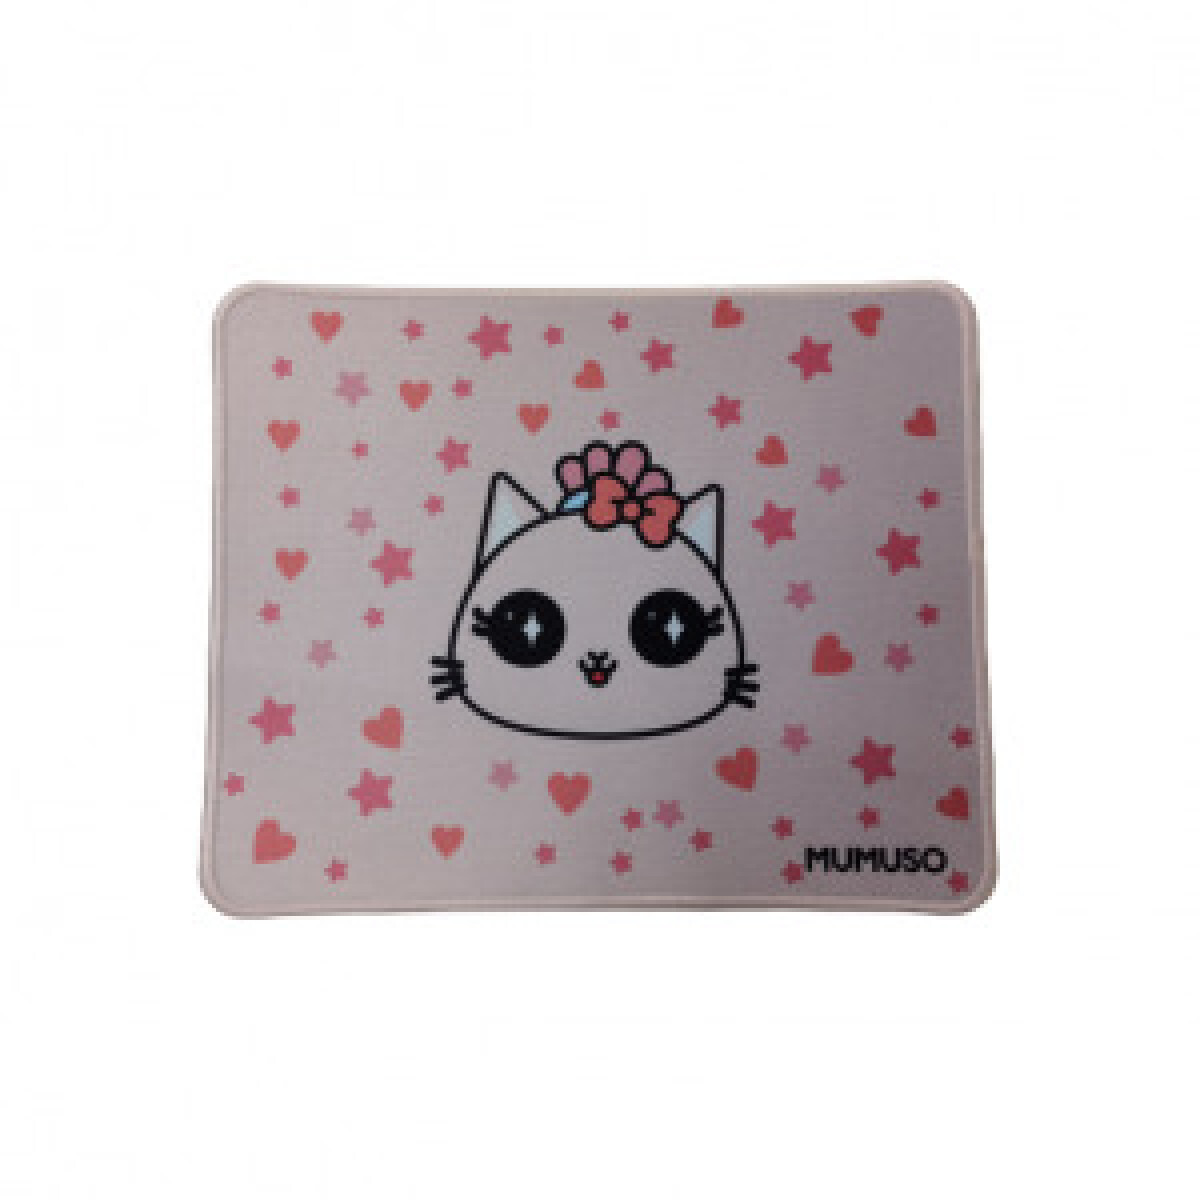 MOUSE PAD -ANNE 